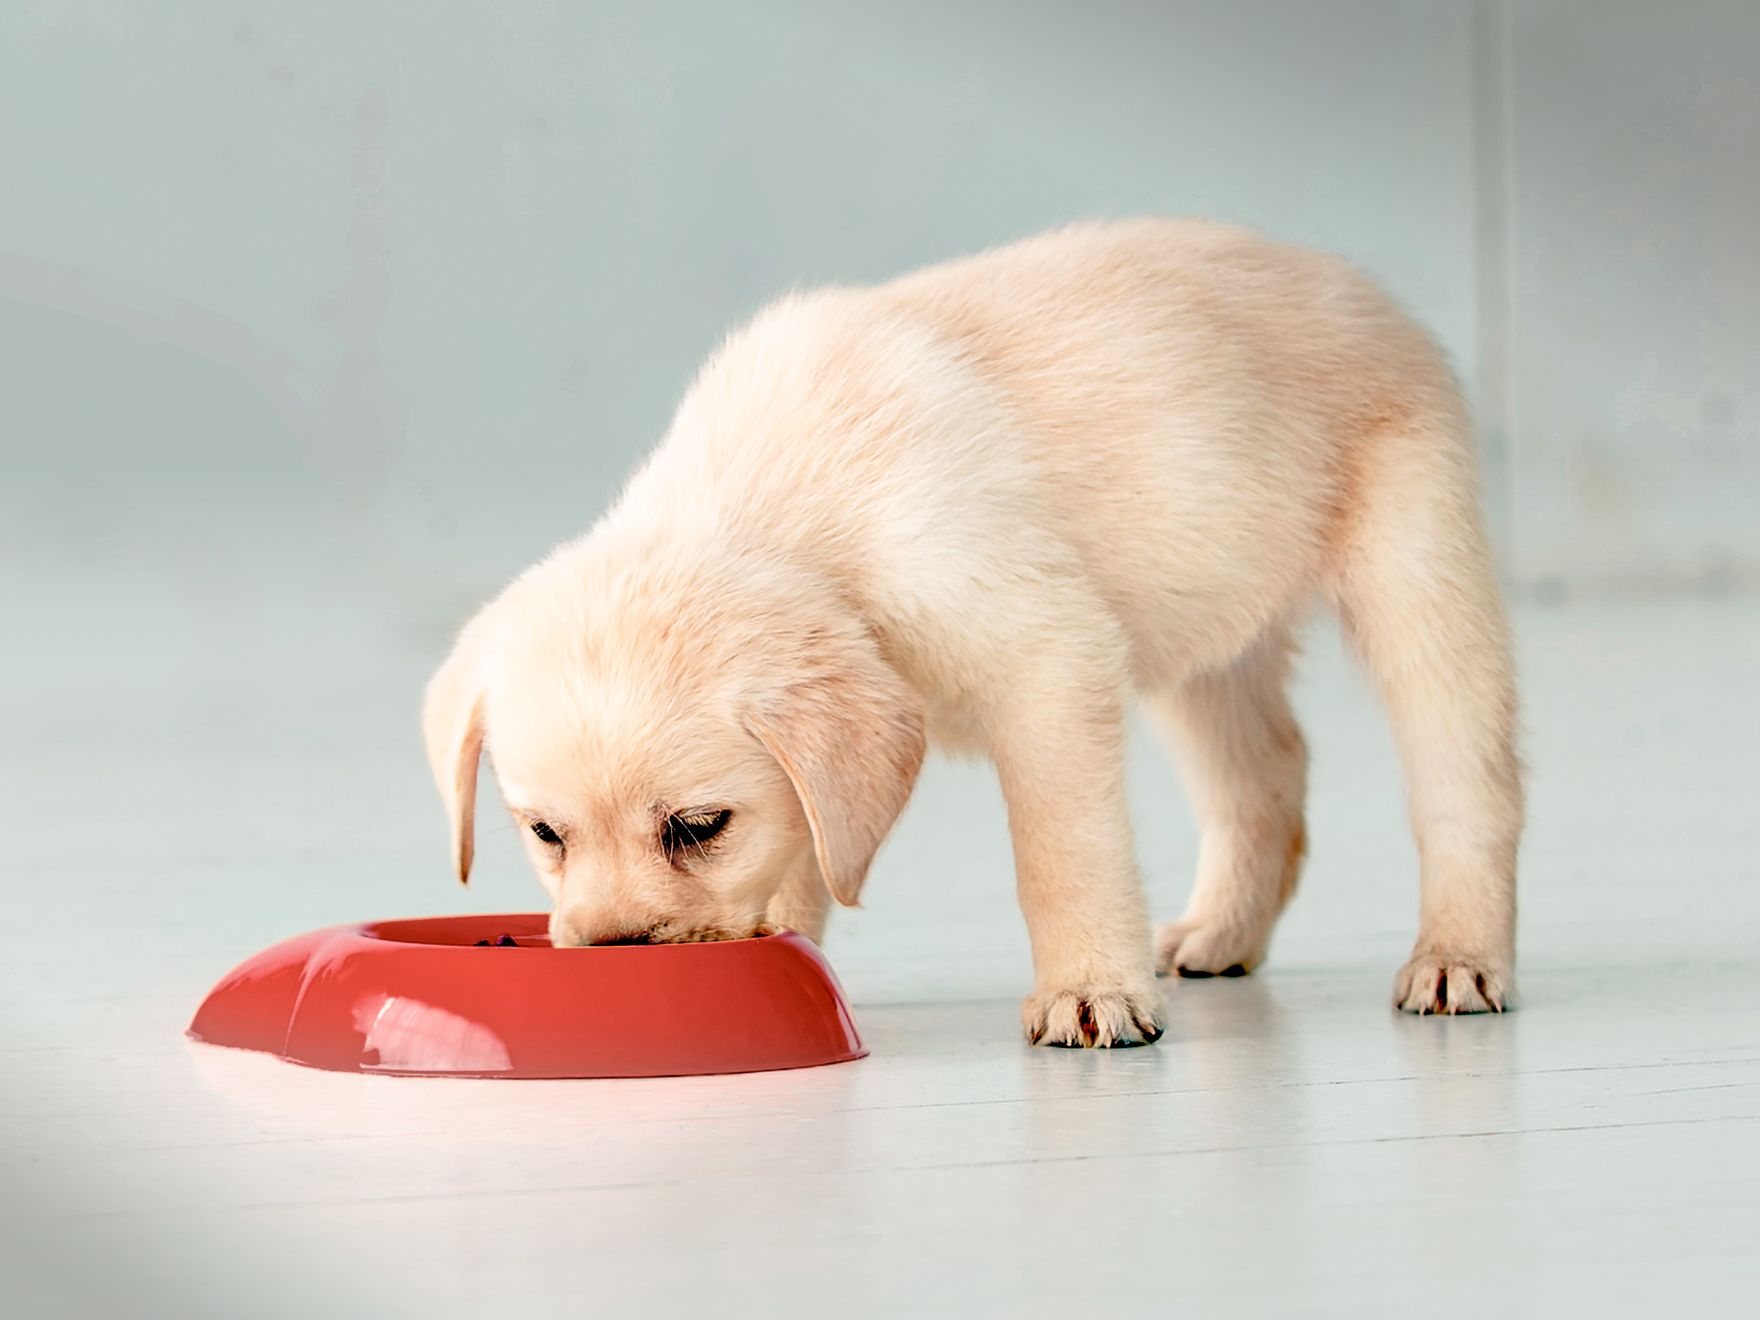 Labrador Retriever puppy eating from a red puzzle feeder